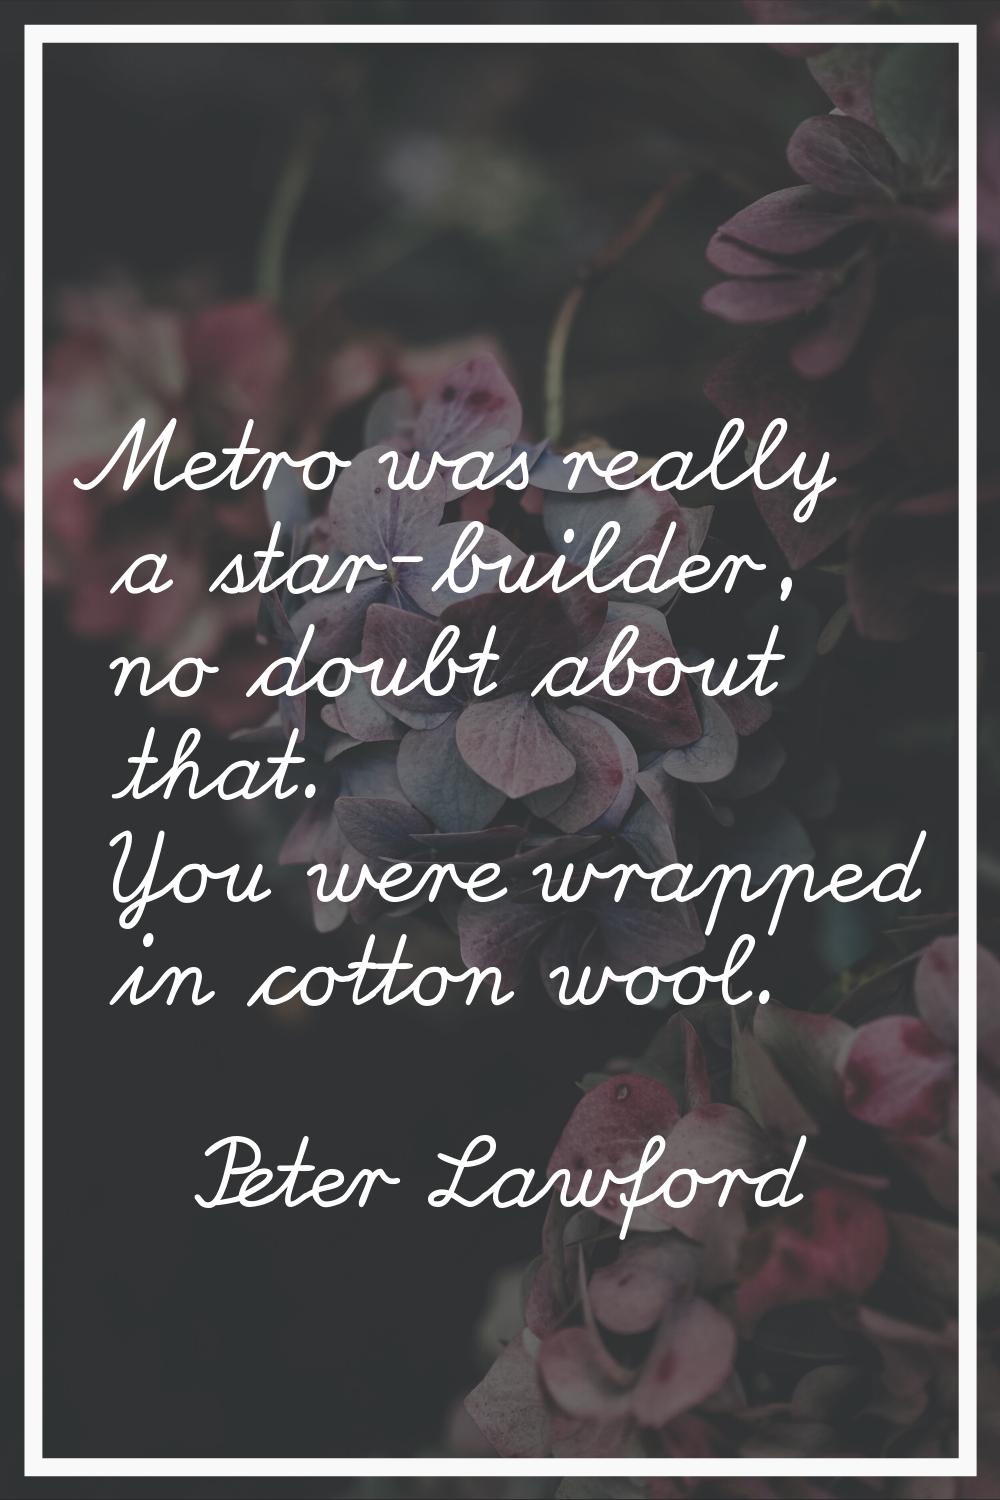 Metro was really a star-builder, no doubt about that. You were wrapped in cotton wool.